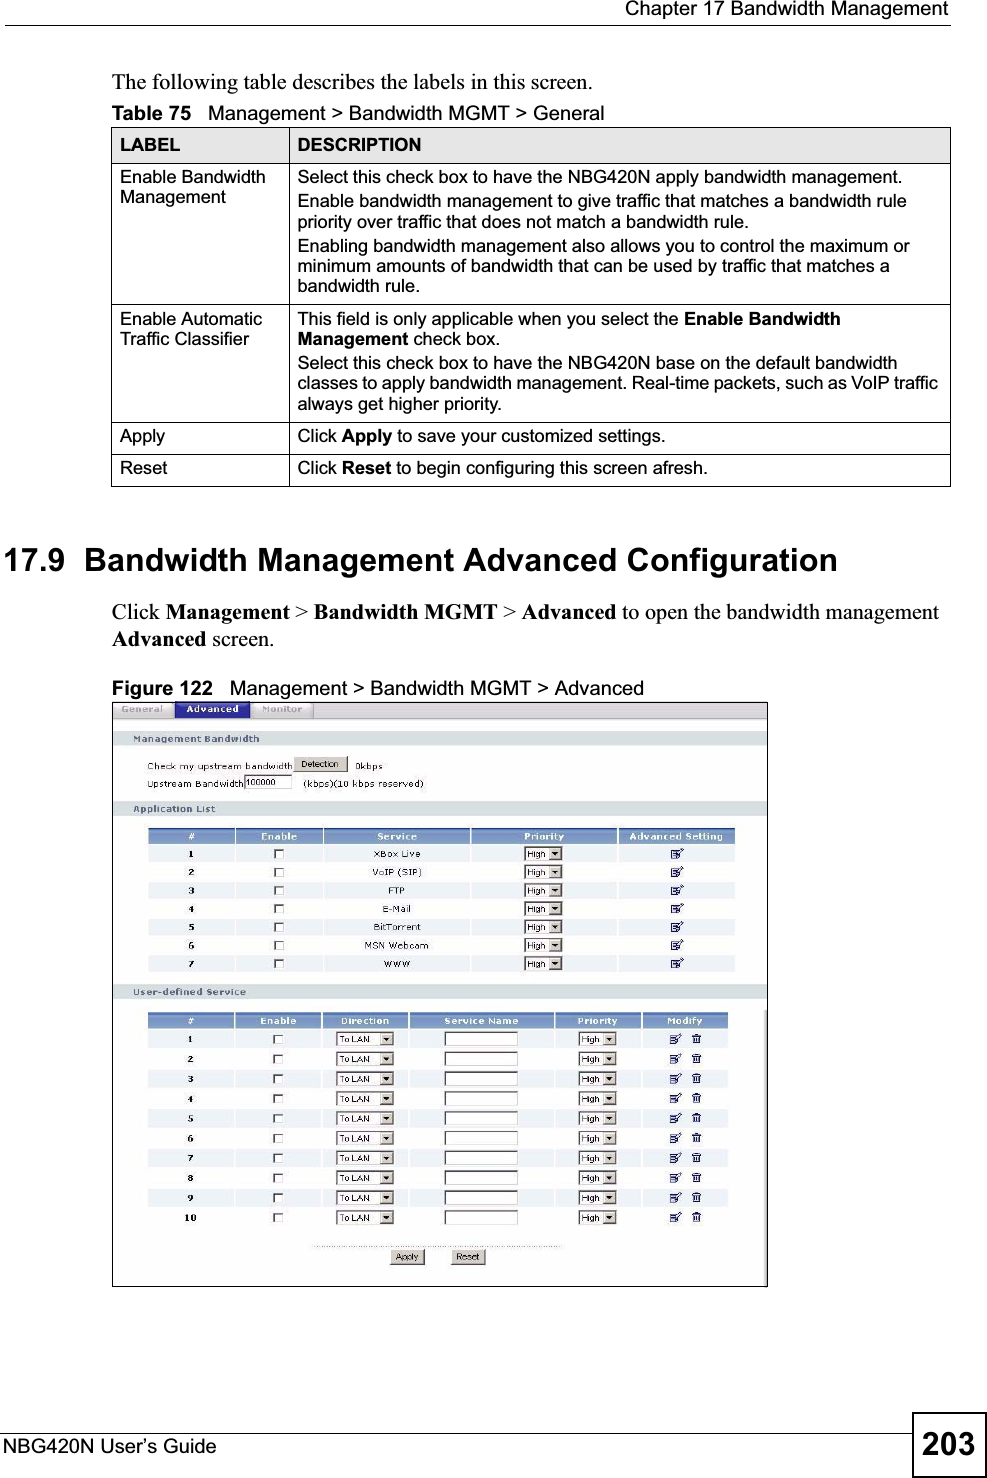  Chapter 17 Bandwidth ManagementNBG420N User’s Guide 203The following table describes the labels in this screen.17.9  Bandwidth Management Advanced Configuration Click Management &gt; Bandwidth MGMT &gt; Advanced to open the bandwidth management Advanced screen.Figure 122   Management &gt; Bandwidth MGMT &gt; Advanced Table 75   Management &gt; Bandwidth MGMT &gt; GeneralLABEL DESCRIPTIONEnable Bandwidth Management Select this check box to have the NBG420N apply bandwidth management. Enable bandwidth management to give traffic that matches a bandwidth rule priority over traffic that does not match a bandwidth rule. Enabling bandwidth management also allows you to control the maximum or minimum amounts of bandwidth that can be used by traffic that matches a bandwidth rule. Enable Automatic Traffic Classifier This field is only applicable when you select the Enable Bandwidth Management check box.Select this check box to have the NBG420N base on the default bandwidth classes to apply bandwidth management. Real-time packets, such as VoIP traffic always get higher priority.Apply Click Apply to save your customized settings.Reset Click Reset to begin configuring this screen afresh.